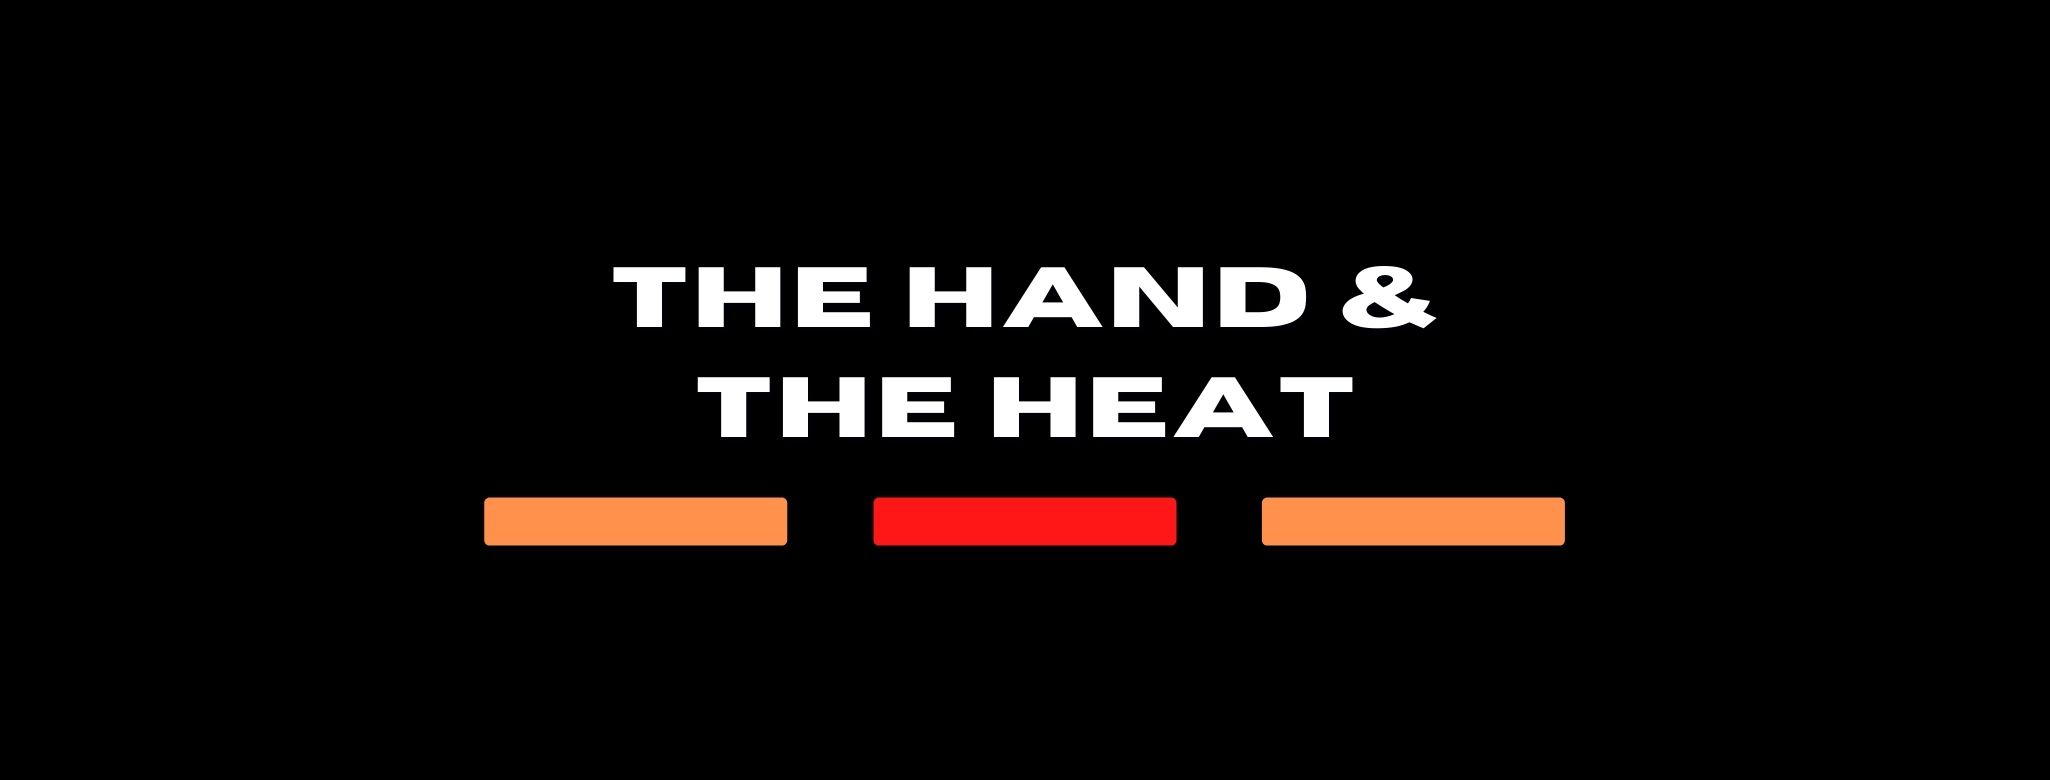 The Hand & The Heat